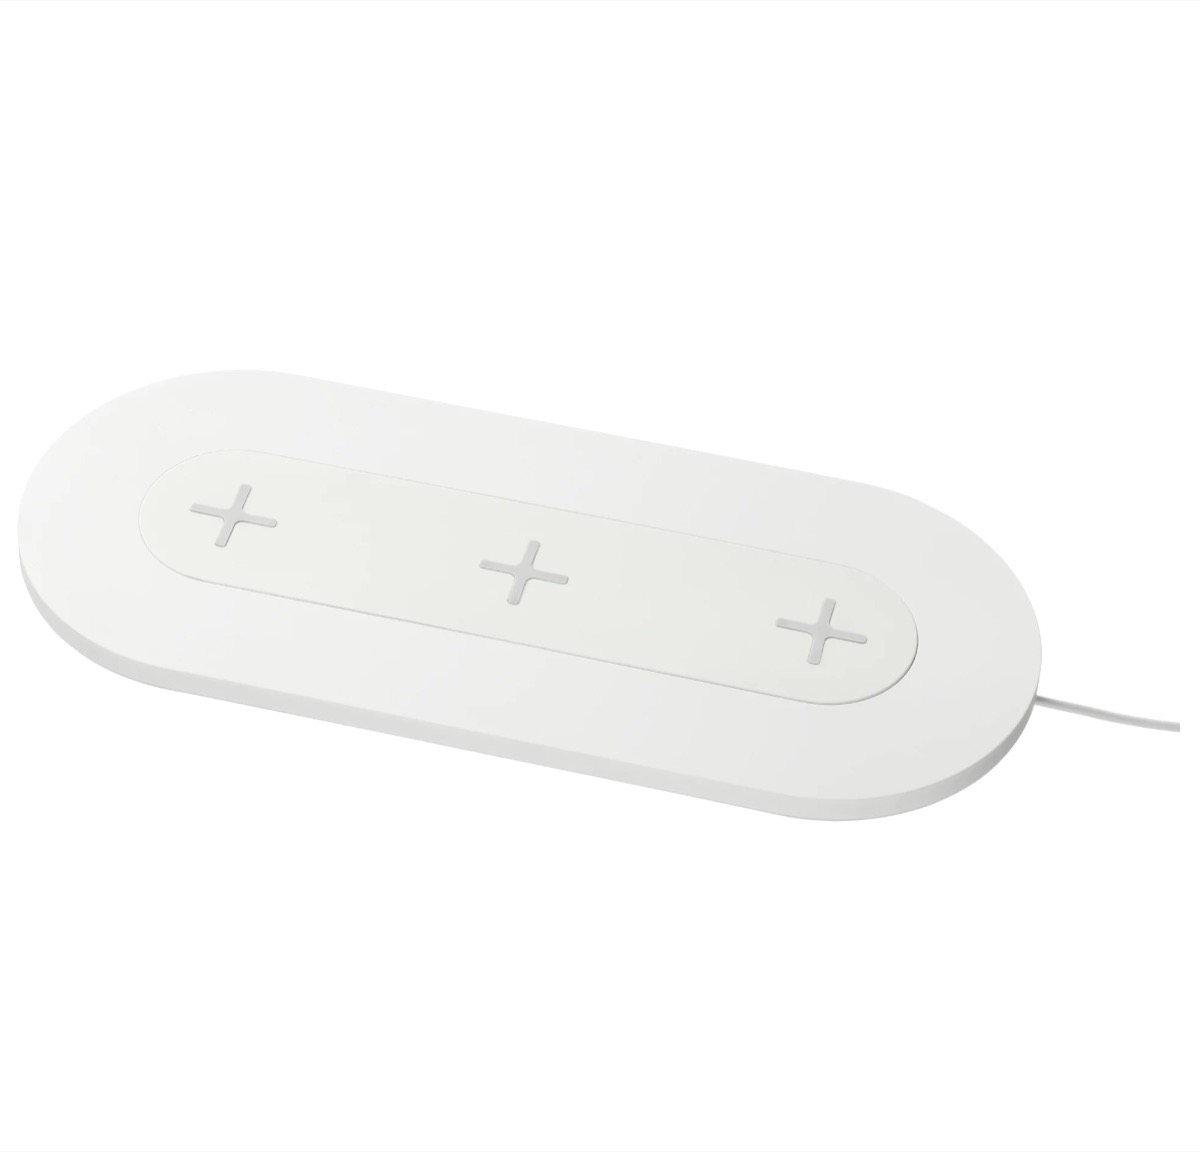 Ikea Wireless Charger {Never Buy at Ikea}